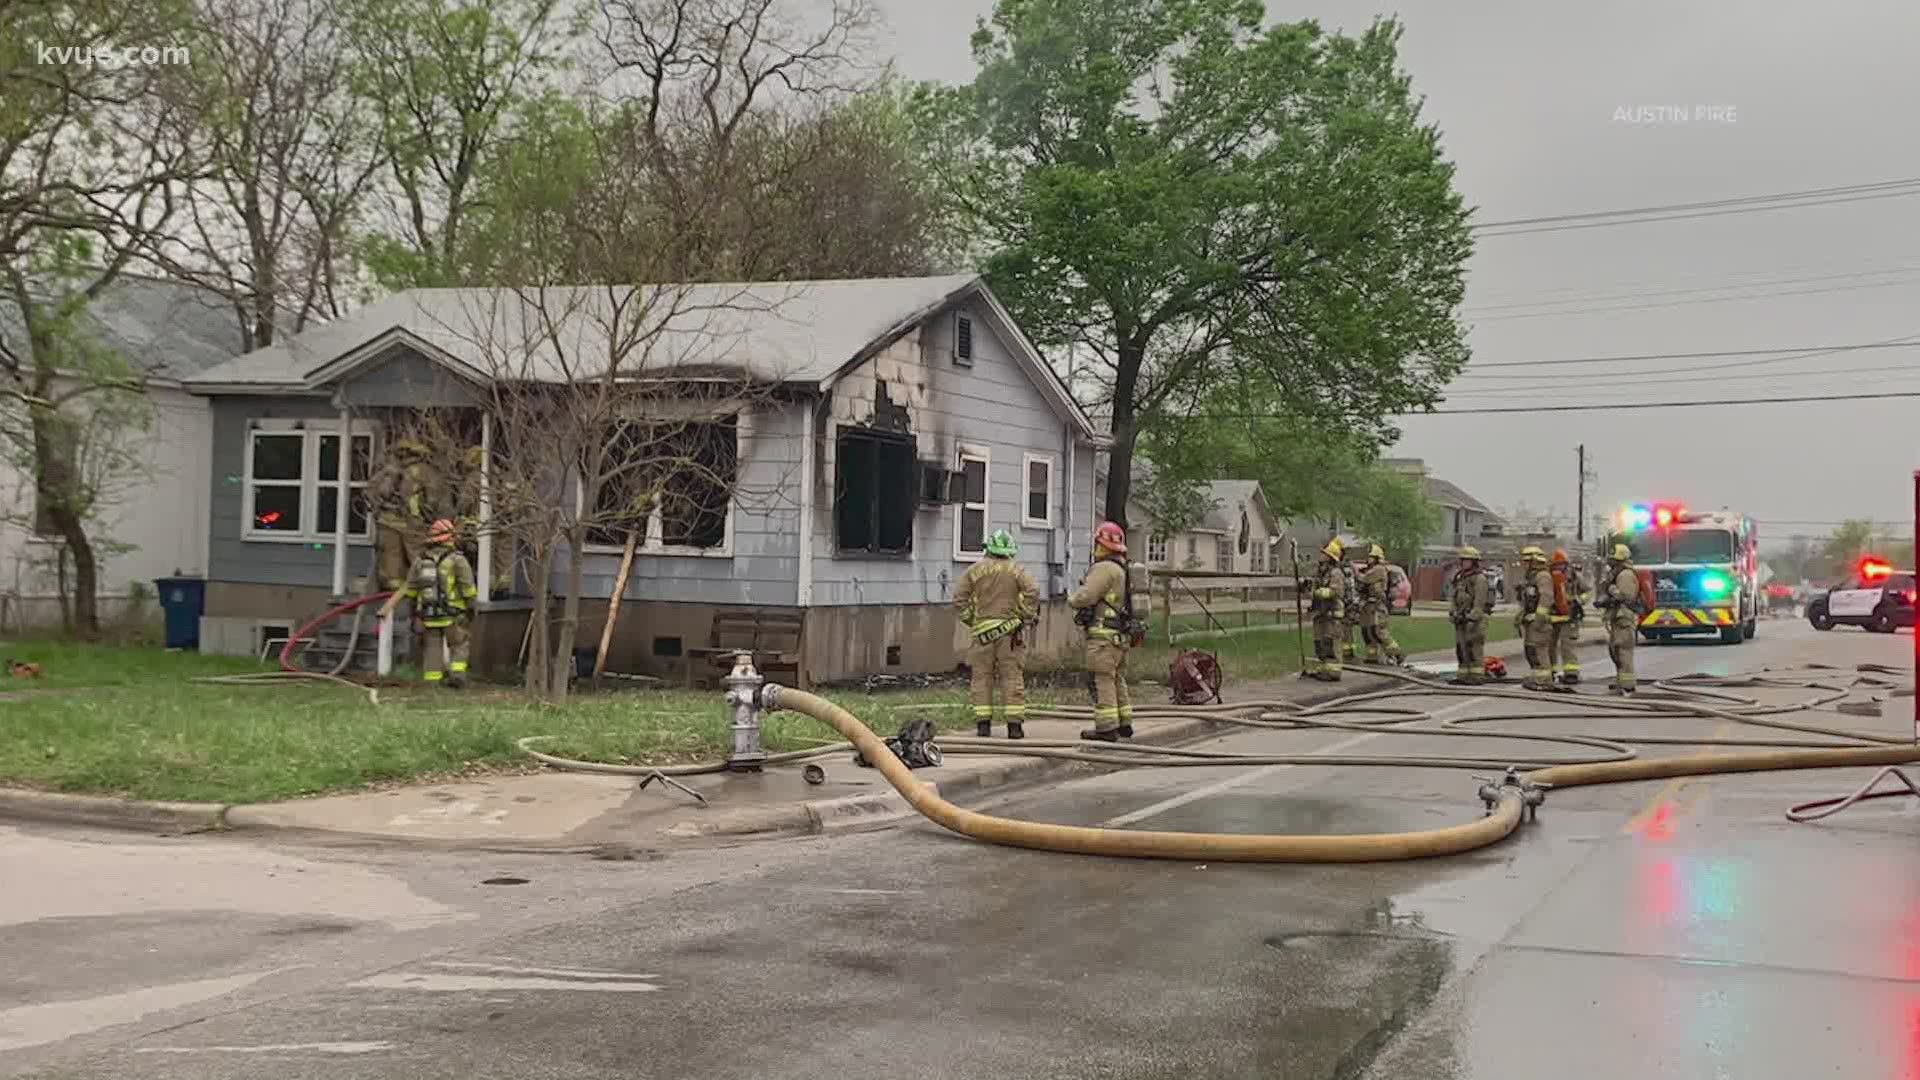 Austin fire officials say a fire in Central Austin Saturday morning was set on purpose.